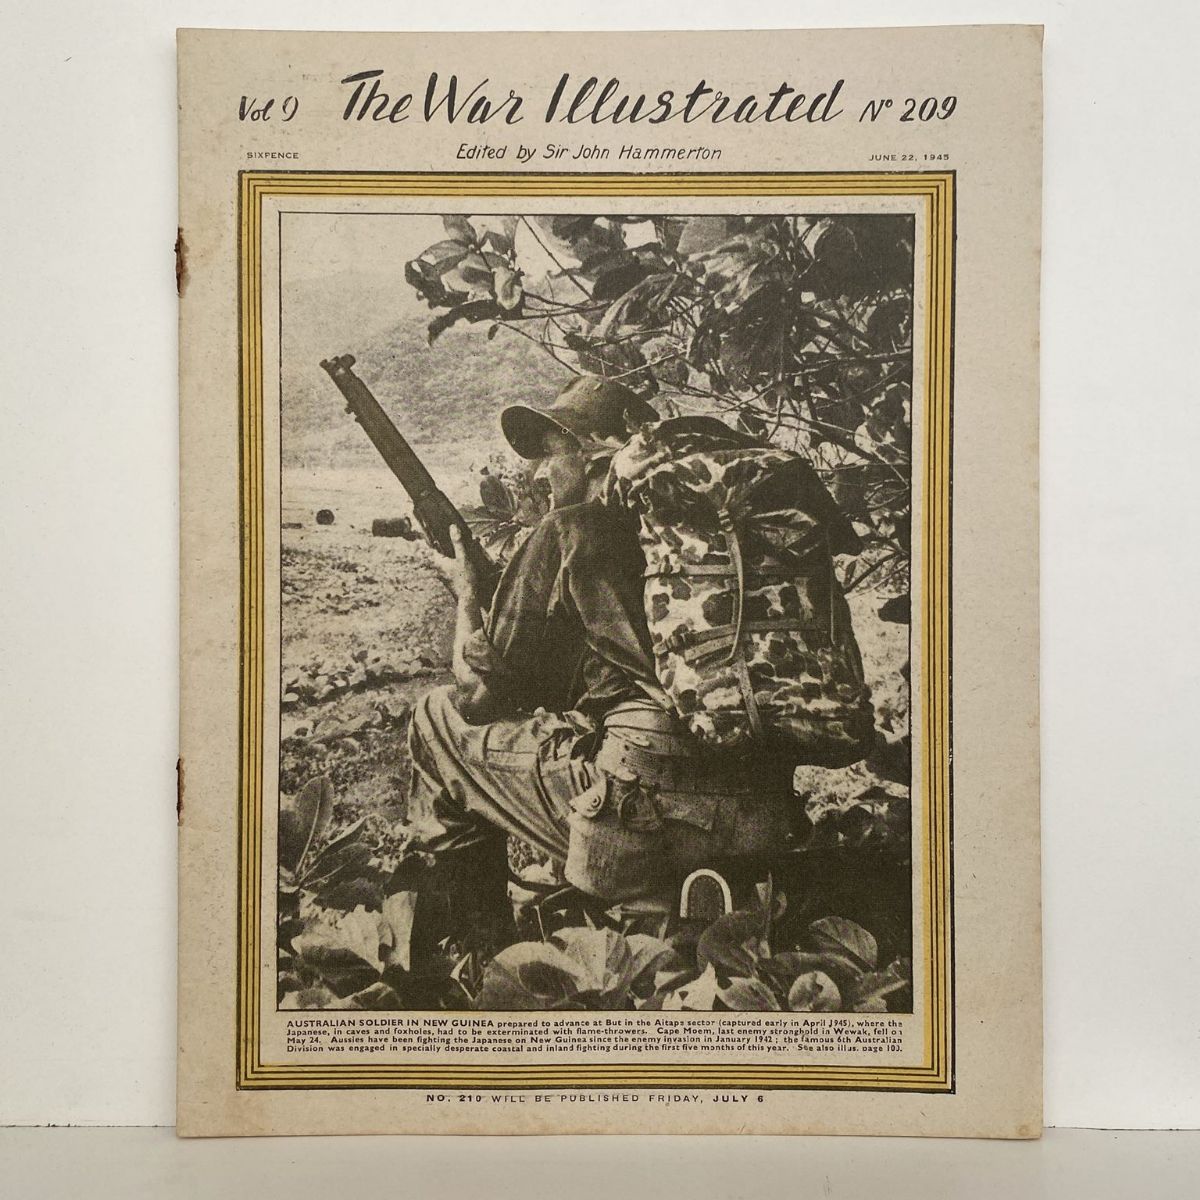 THE WAR ILLUSTRATED - Vol 9, No 209, 22nd June 1945